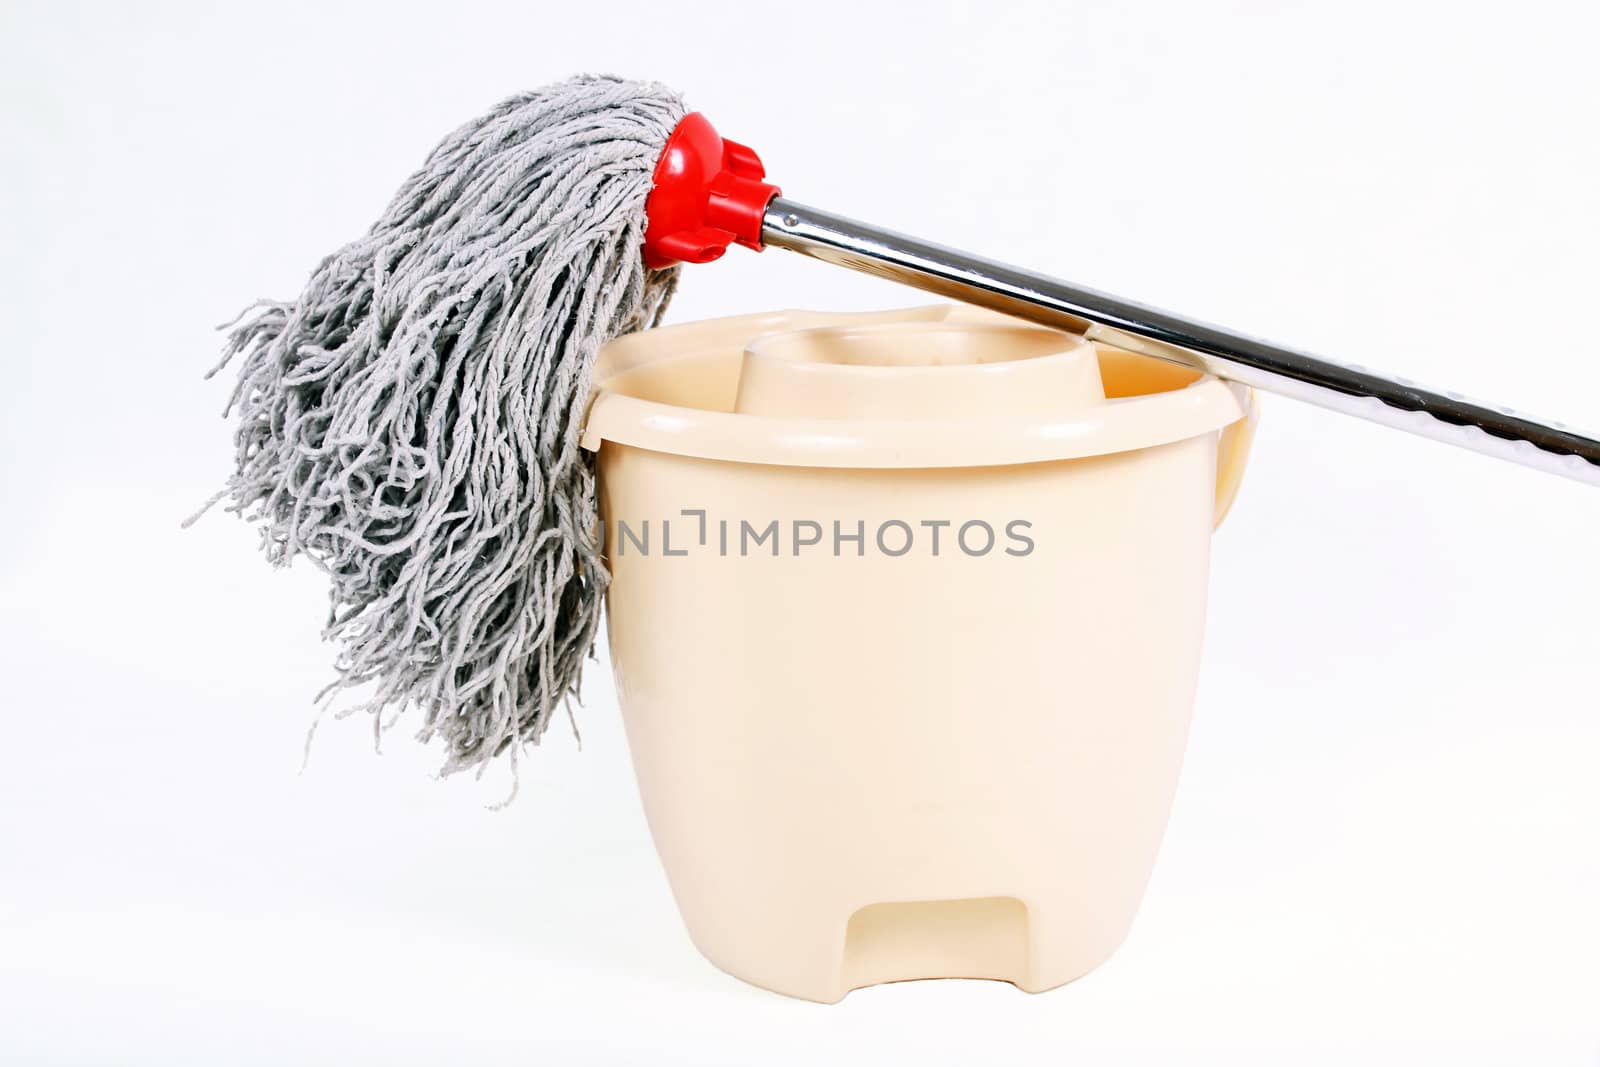 Cleaning kit on white background